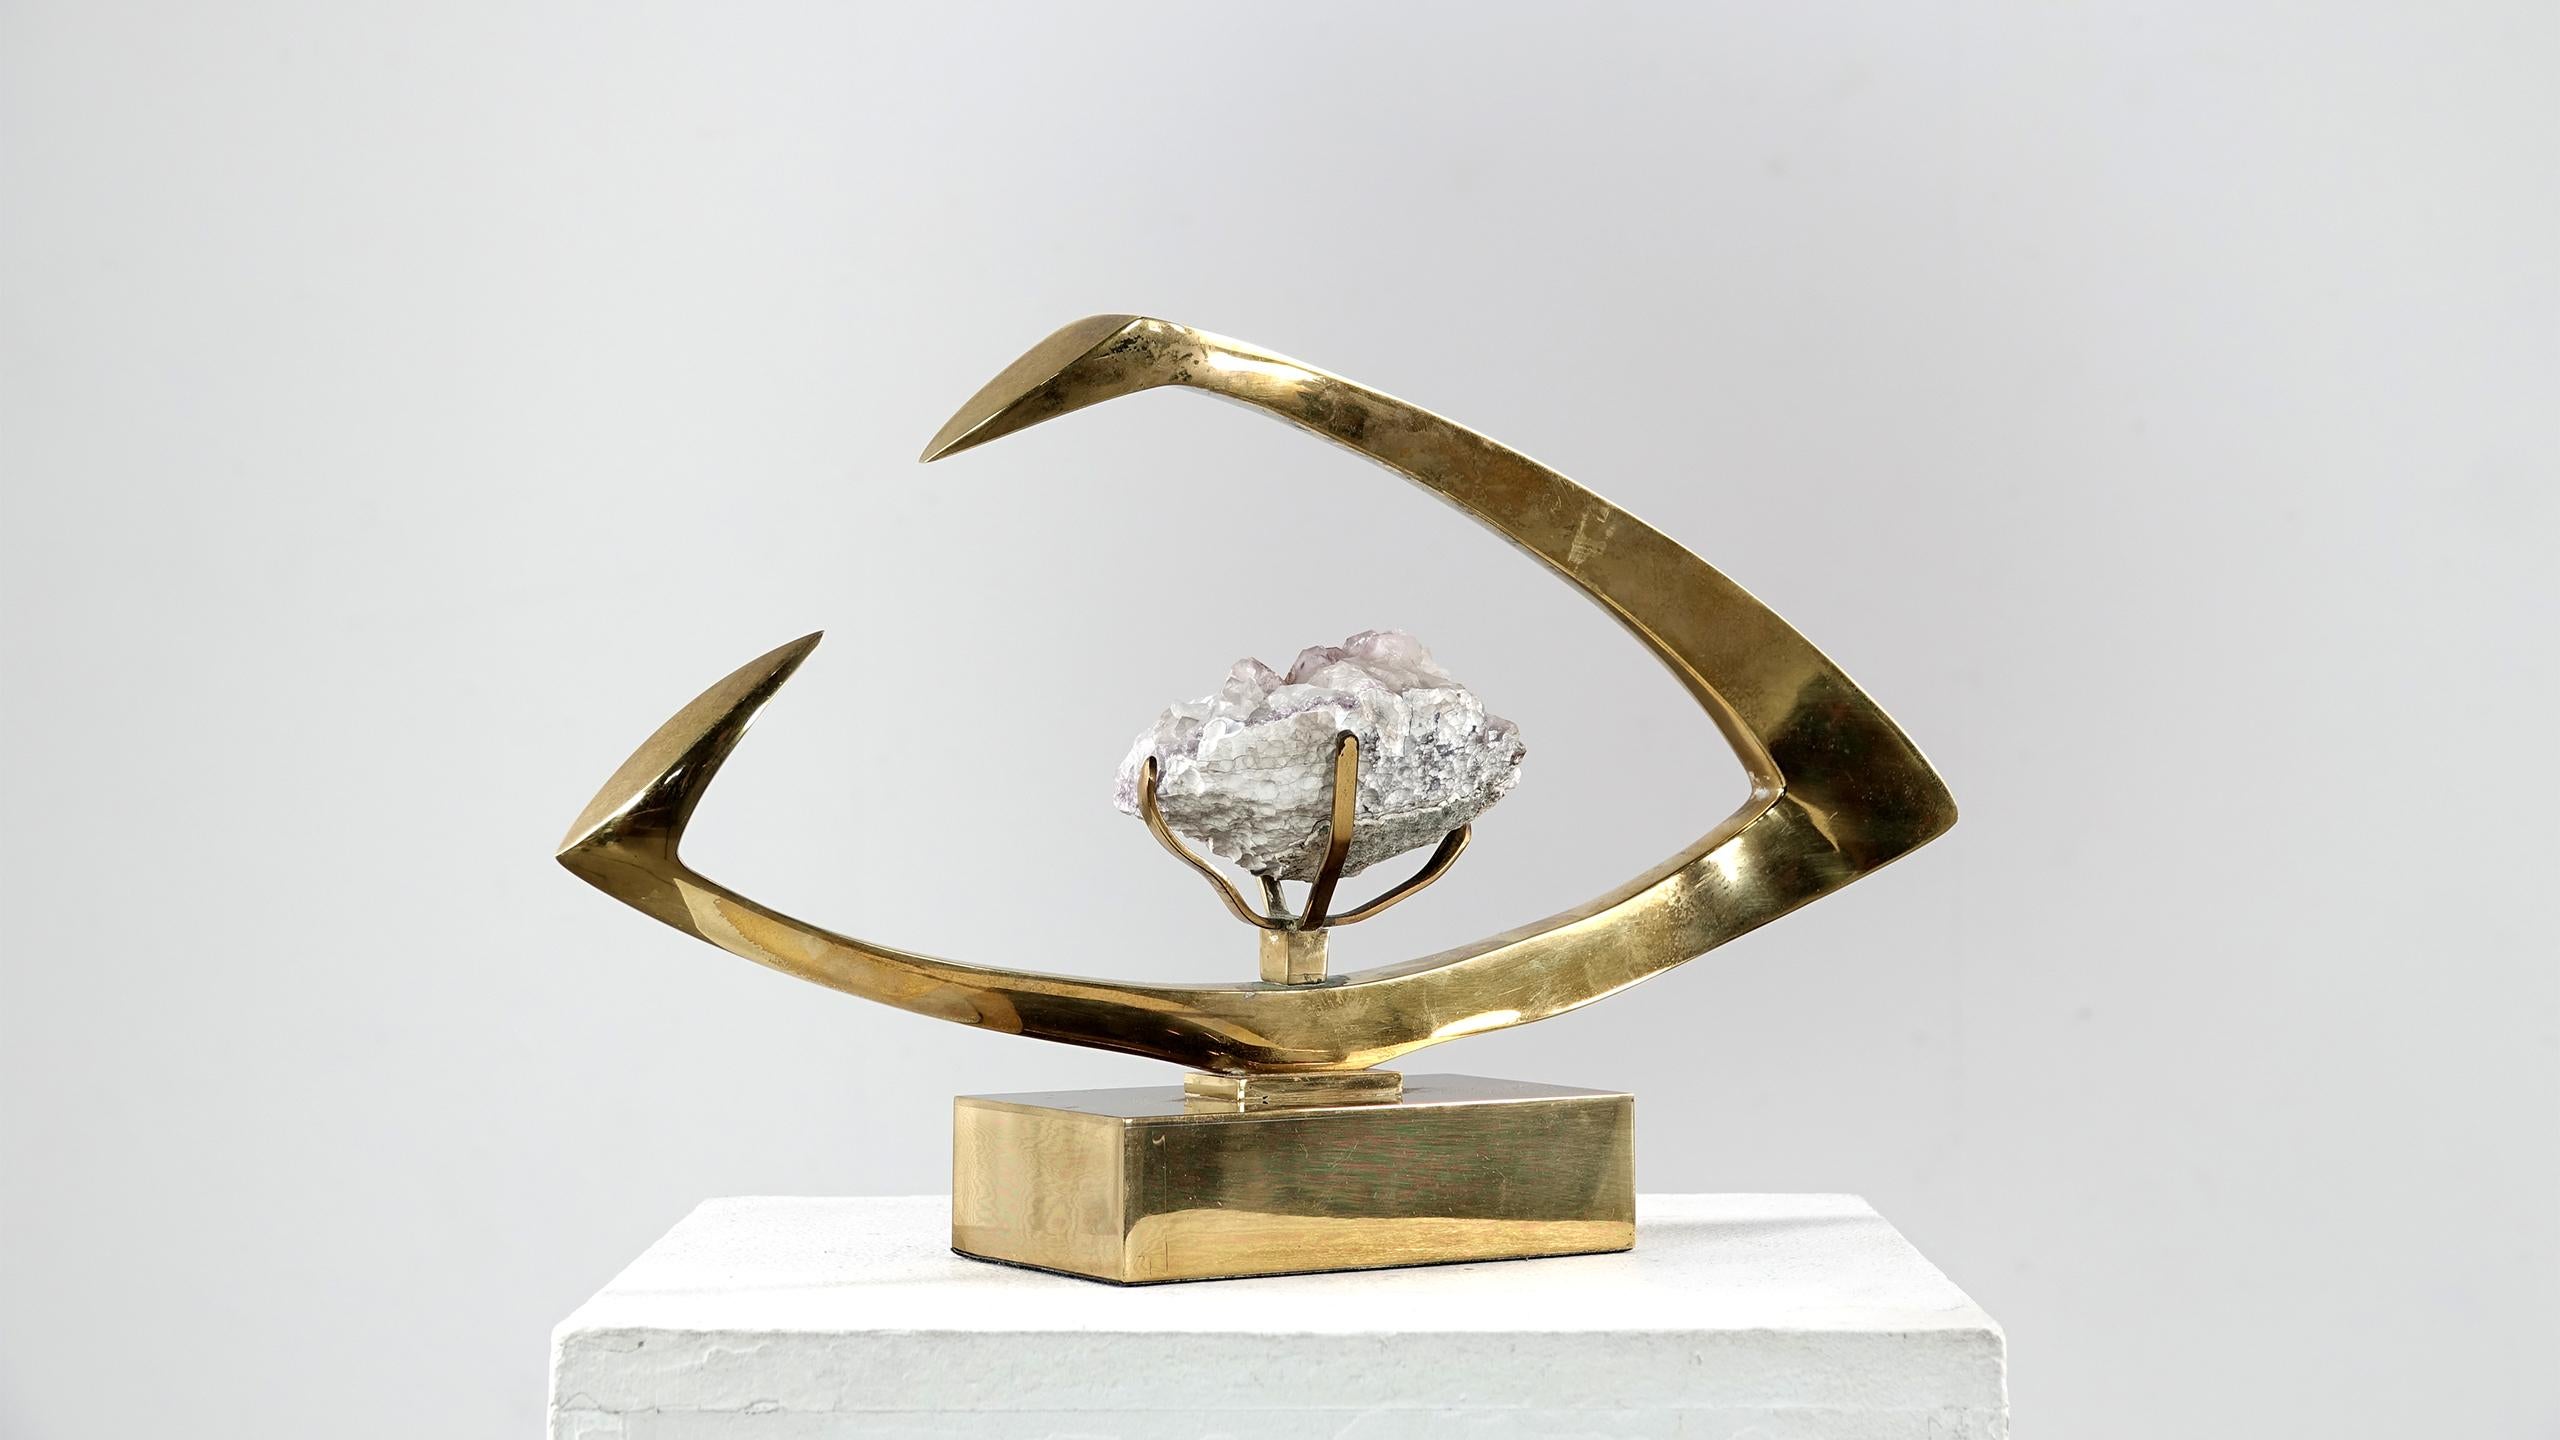 This amazing signed sculpture was created by Willy Daro in the 1970s. On a rectangular plinth with a transversal oval setting, inside it is a large crystal.
The Belgian artist Willy Daro loved to work with brass in combination with mineral